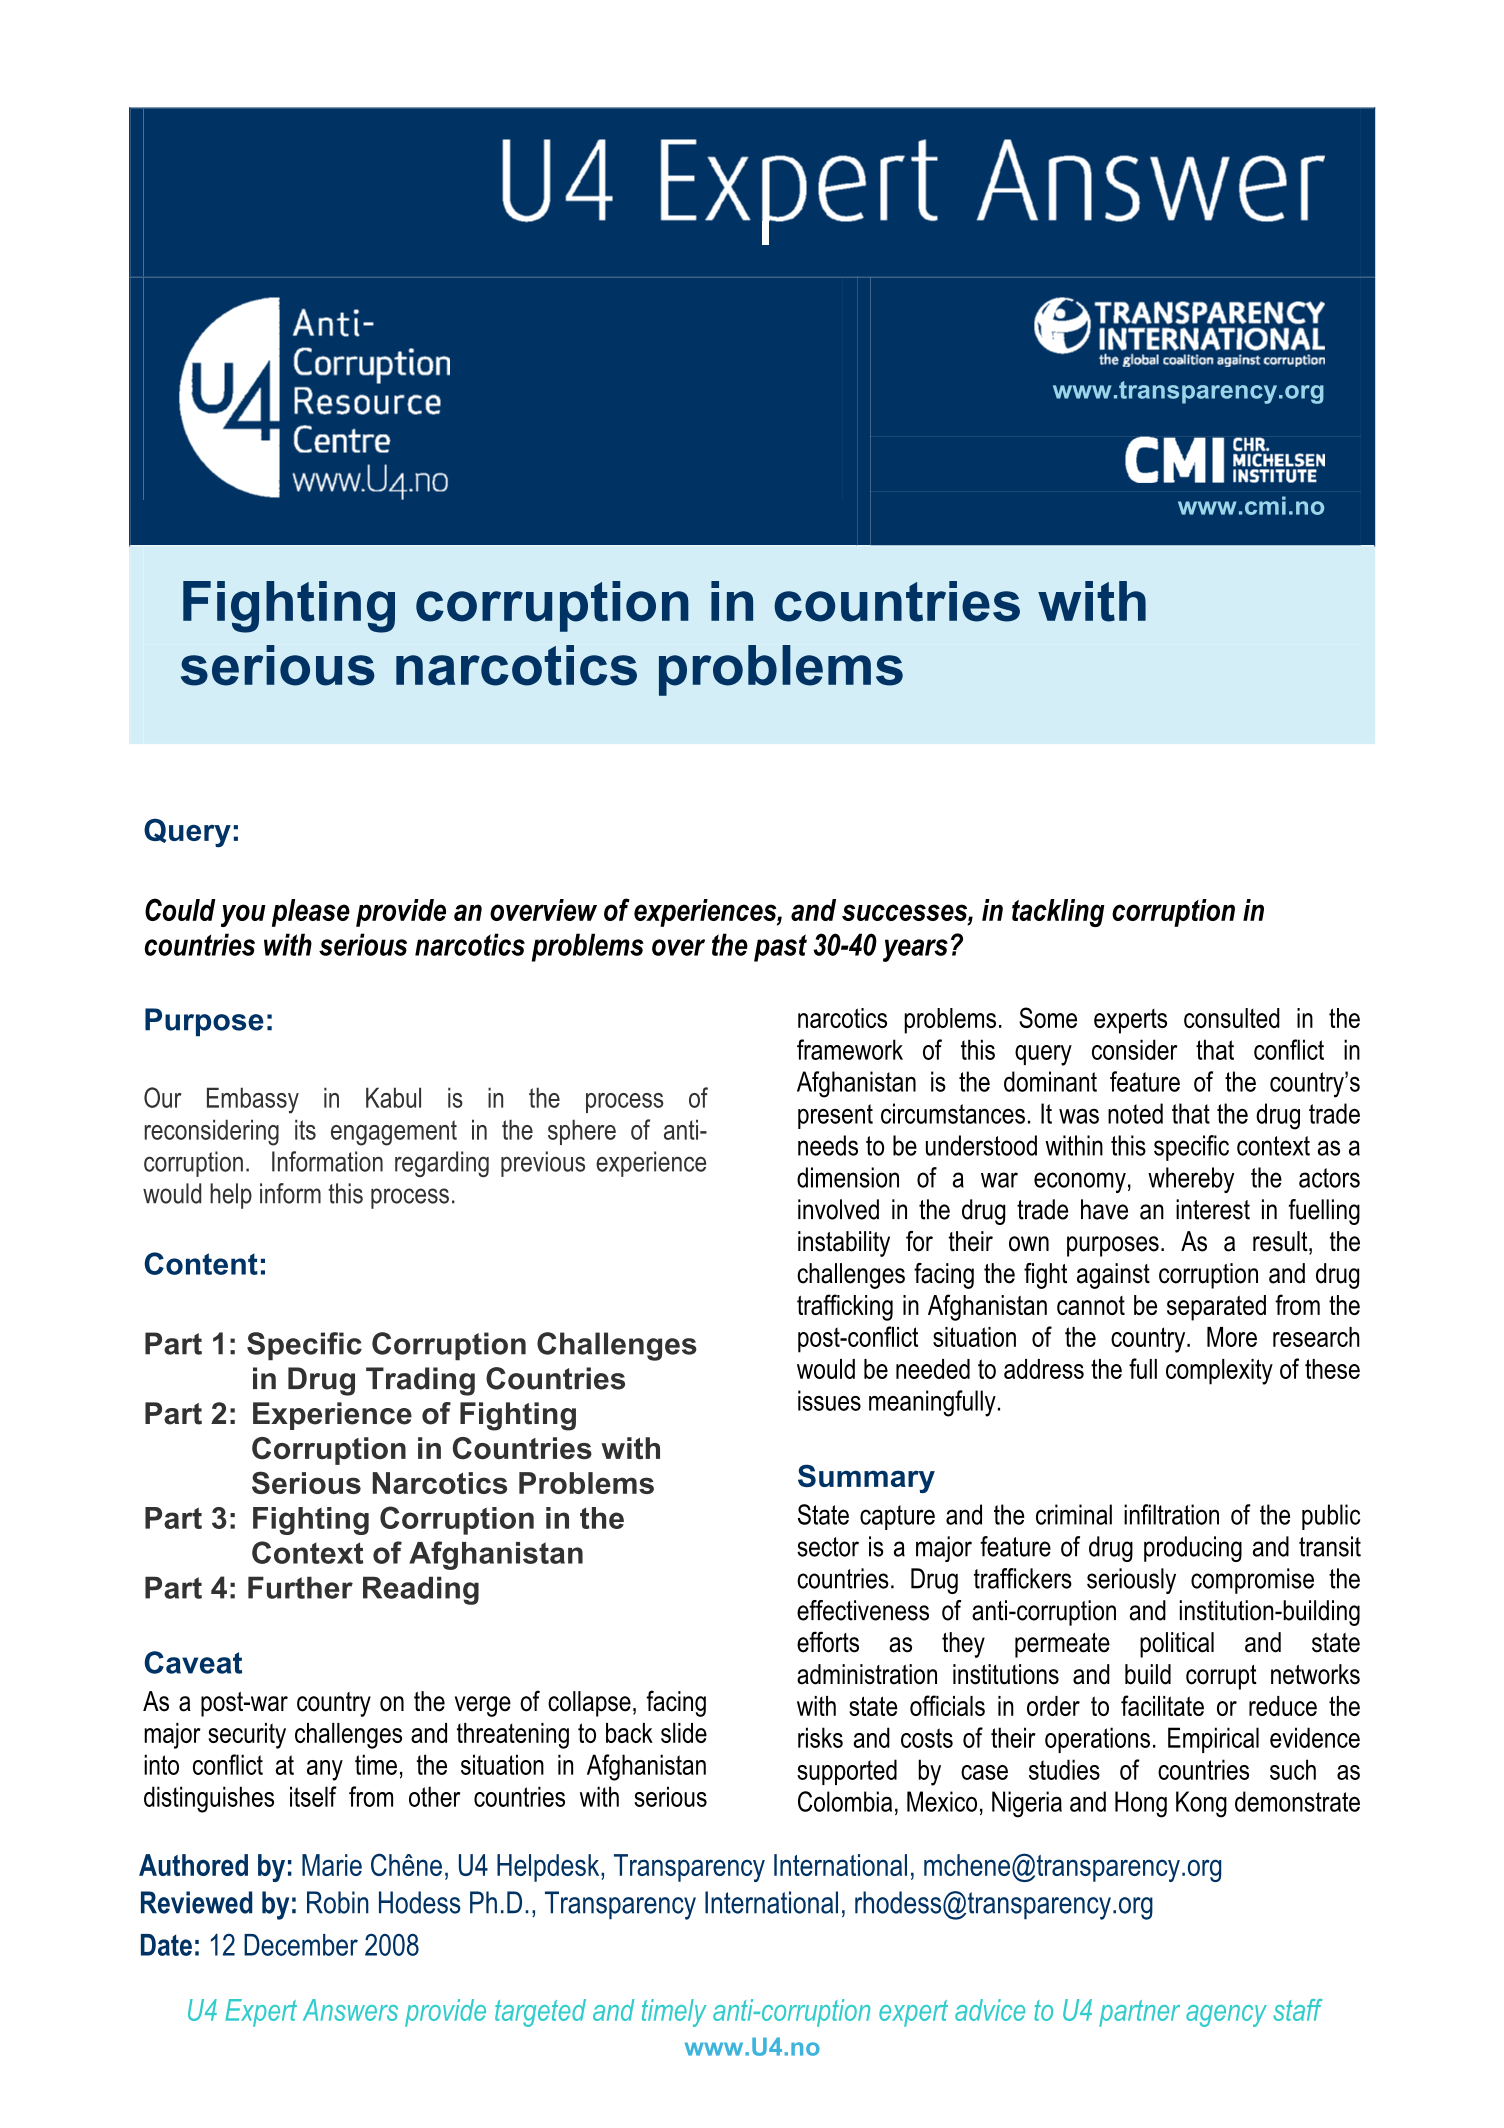 Fighting corruption in countries with serious narcotics problems